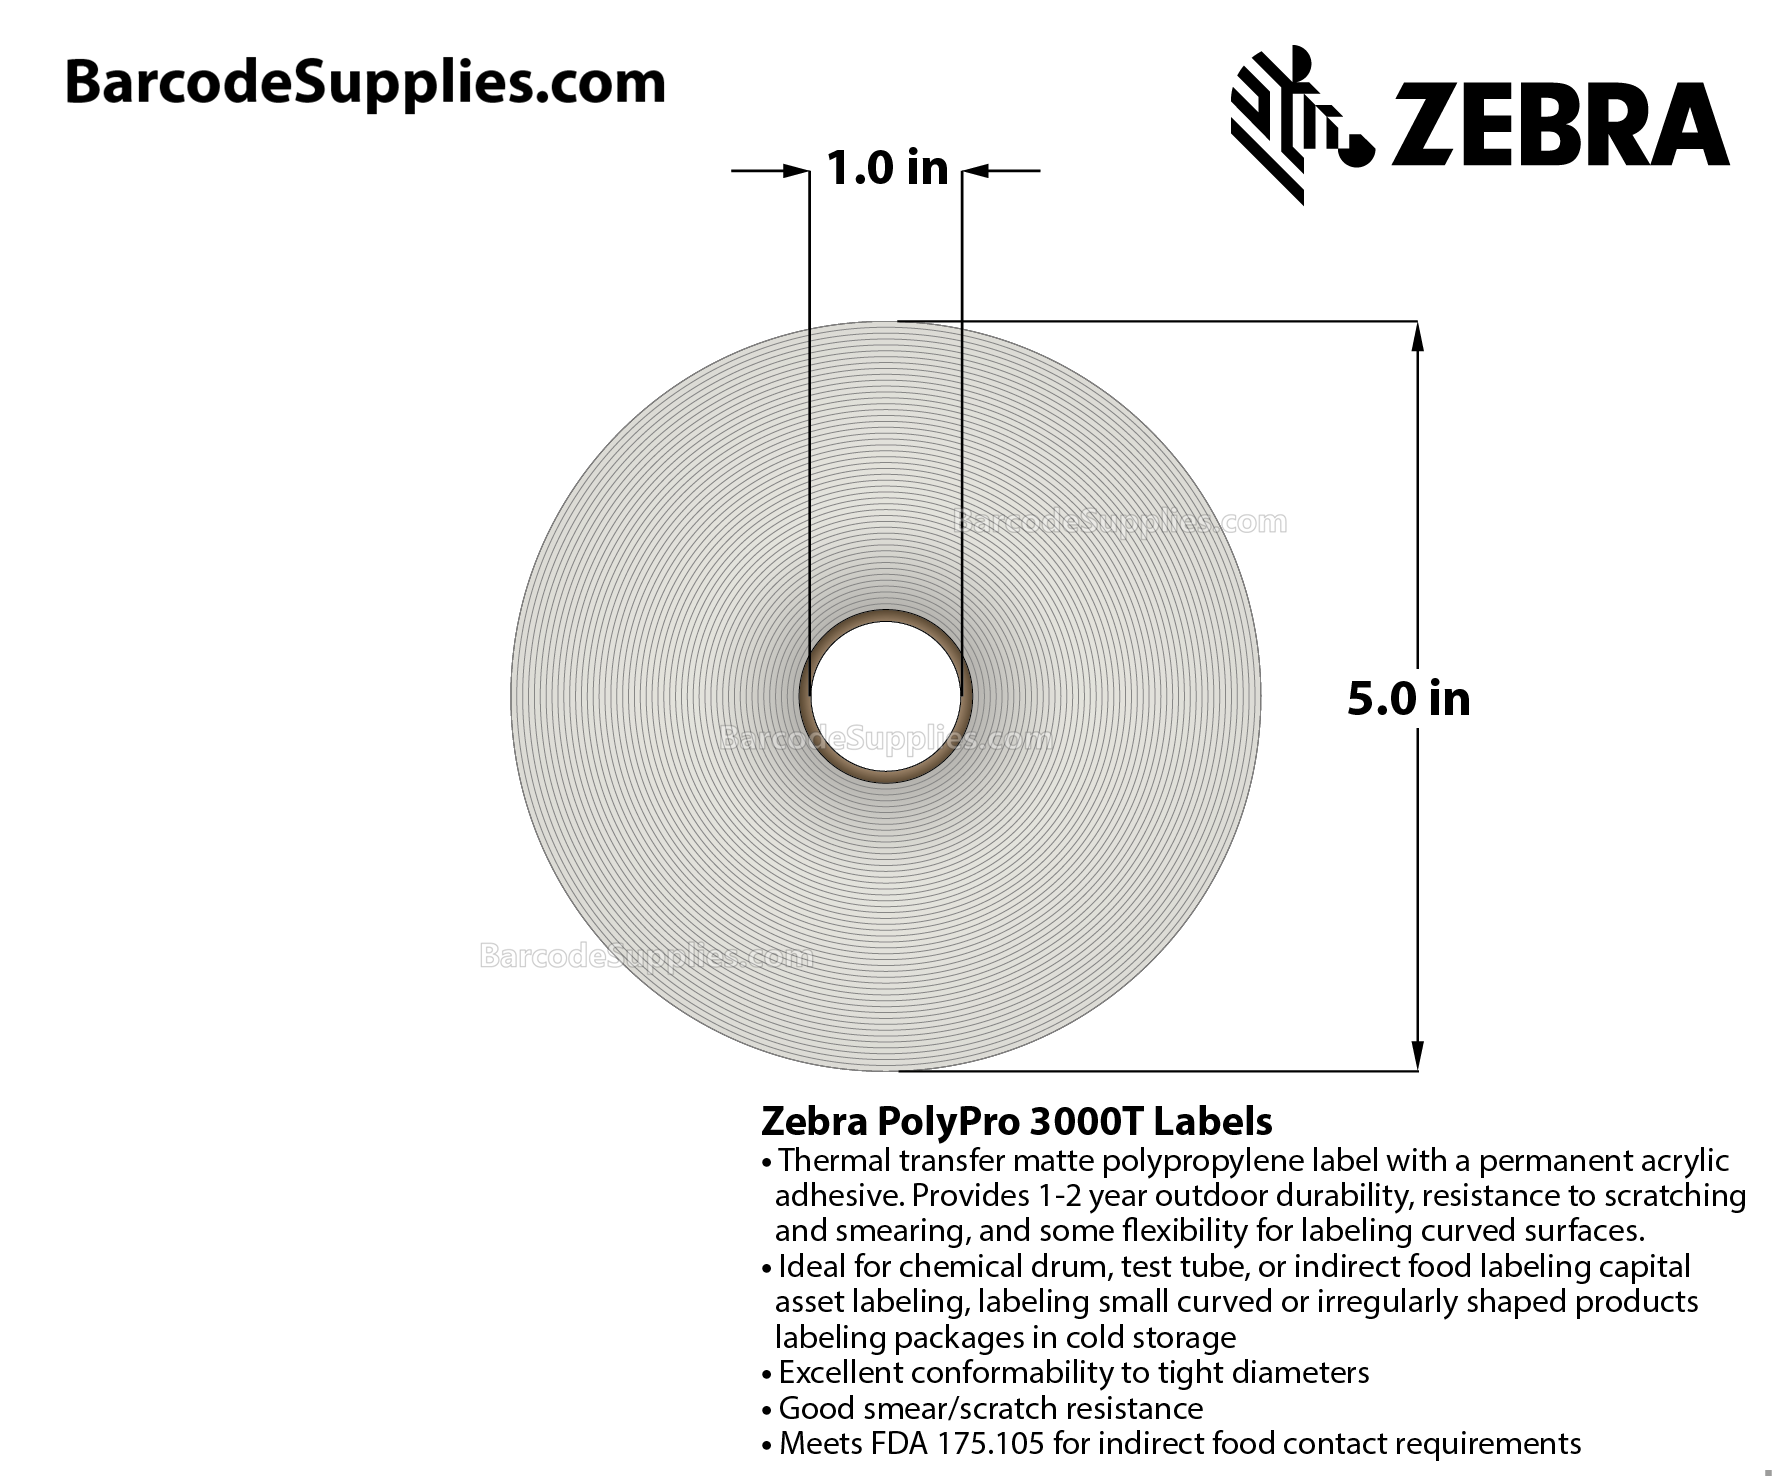 1.5 x 0.5 Thermal Transfer White PolyPro 3000T Labels With Permanent Adhesive - - Perforated - 3780 Labels Per Roll - Carton Of 8 Rolls - 30240 Labels Total - MPN: 18930